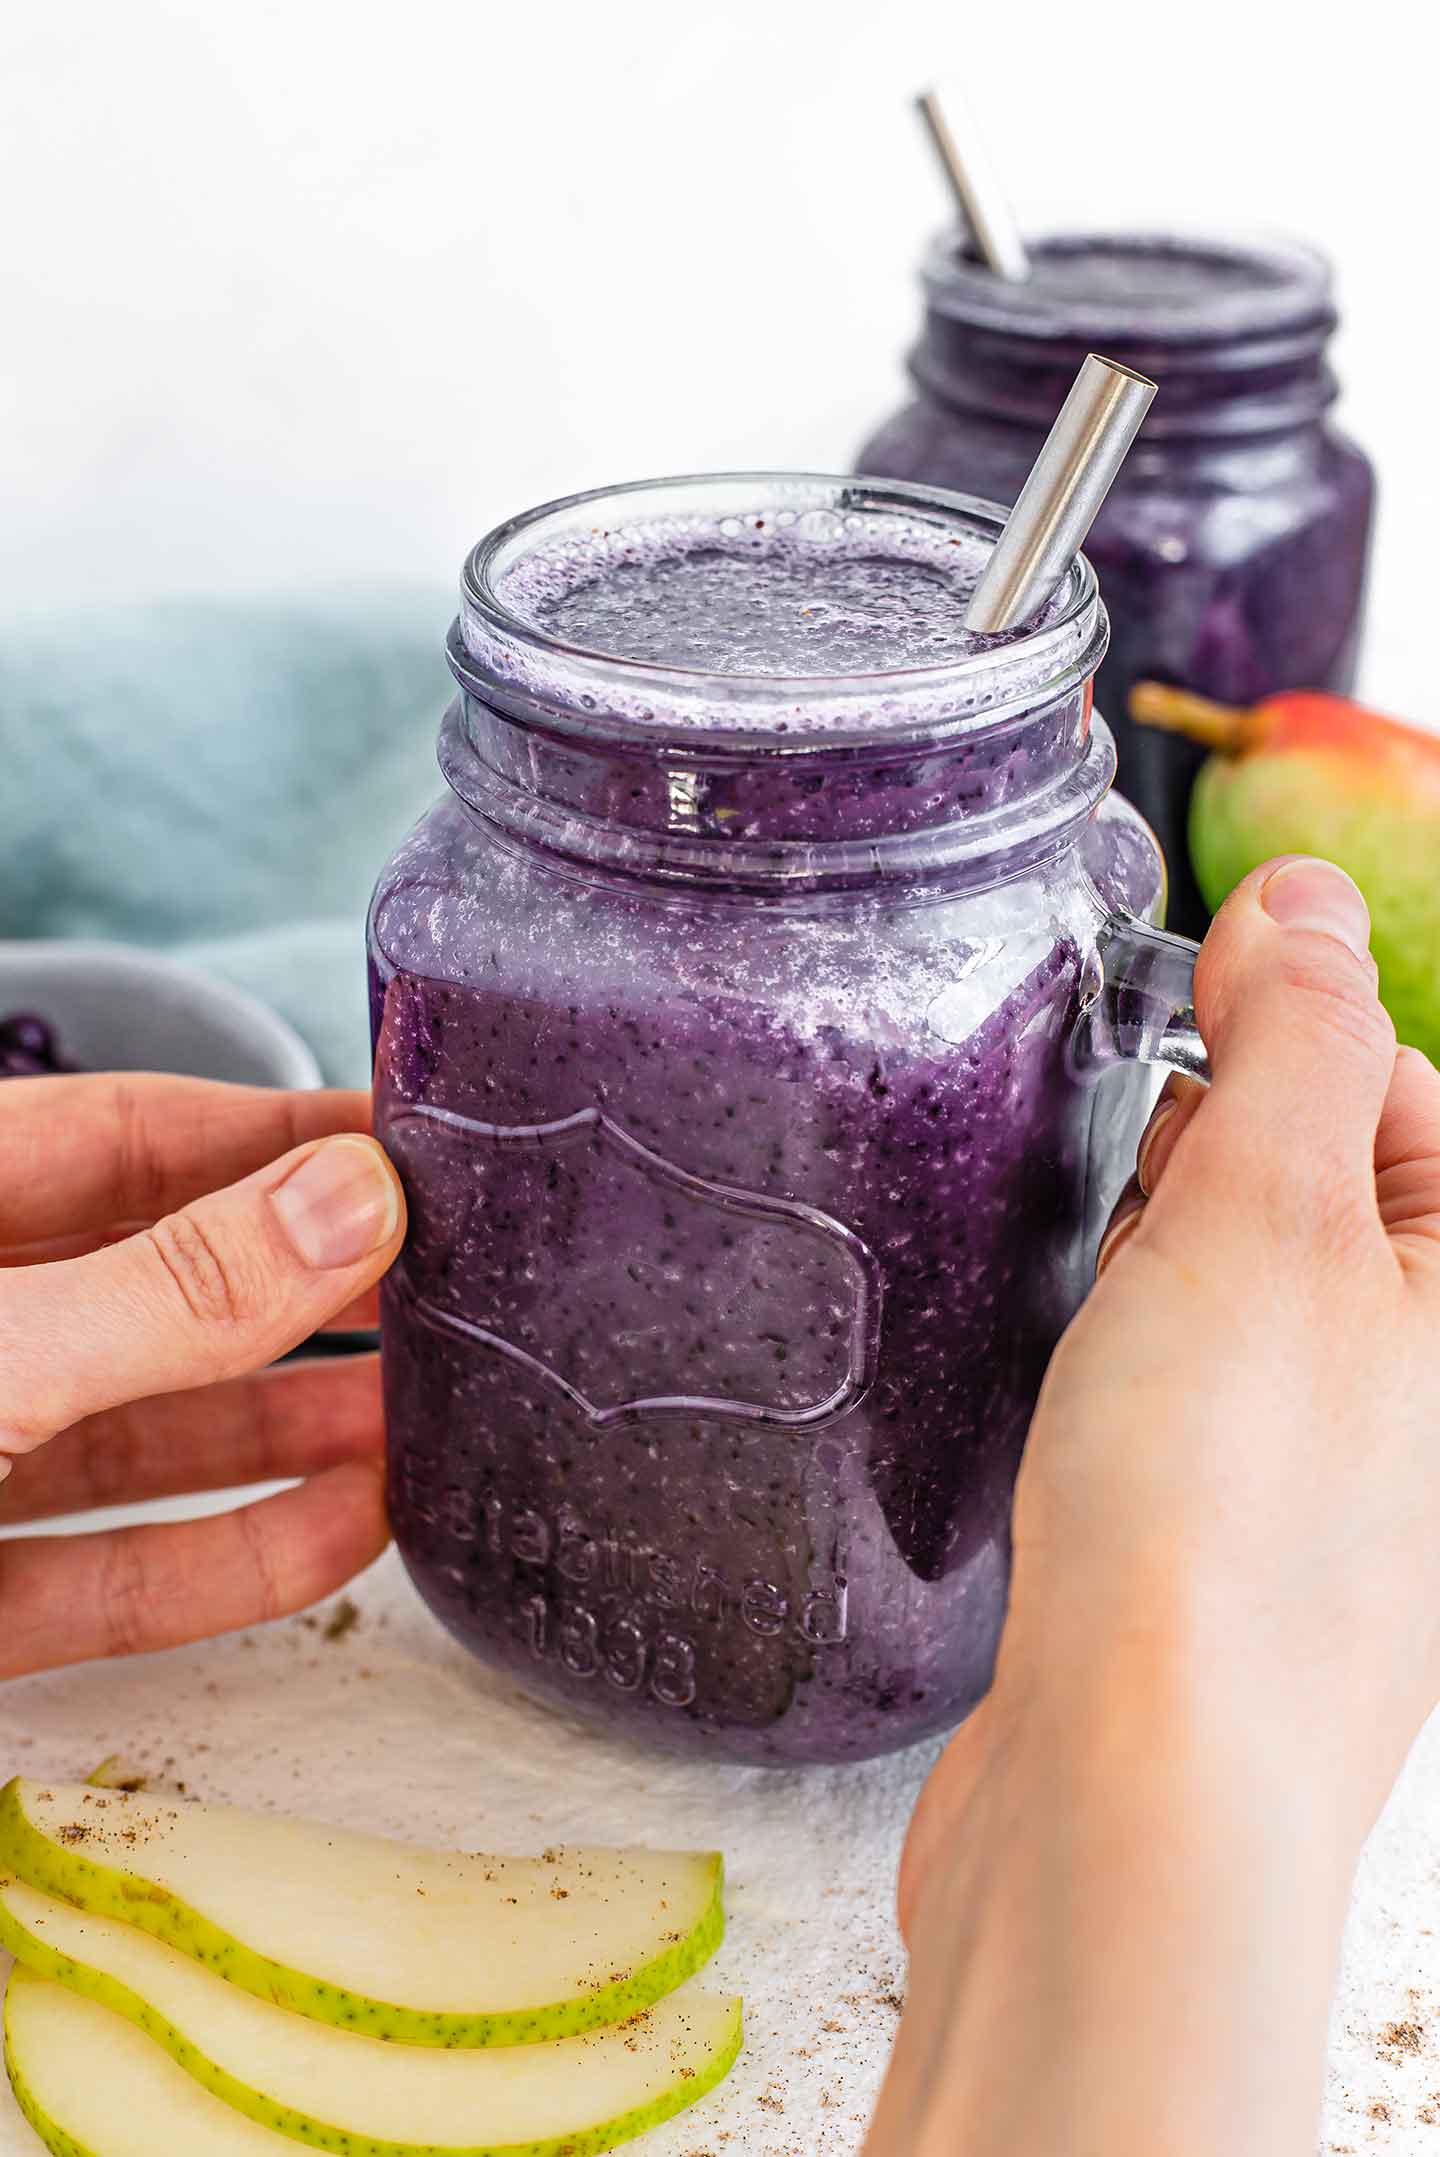 Side view of two hands holding a blueberry pear smoothie. Another smoothie is in the background and pear slices, sprinkled with cardamom are on a white tray.